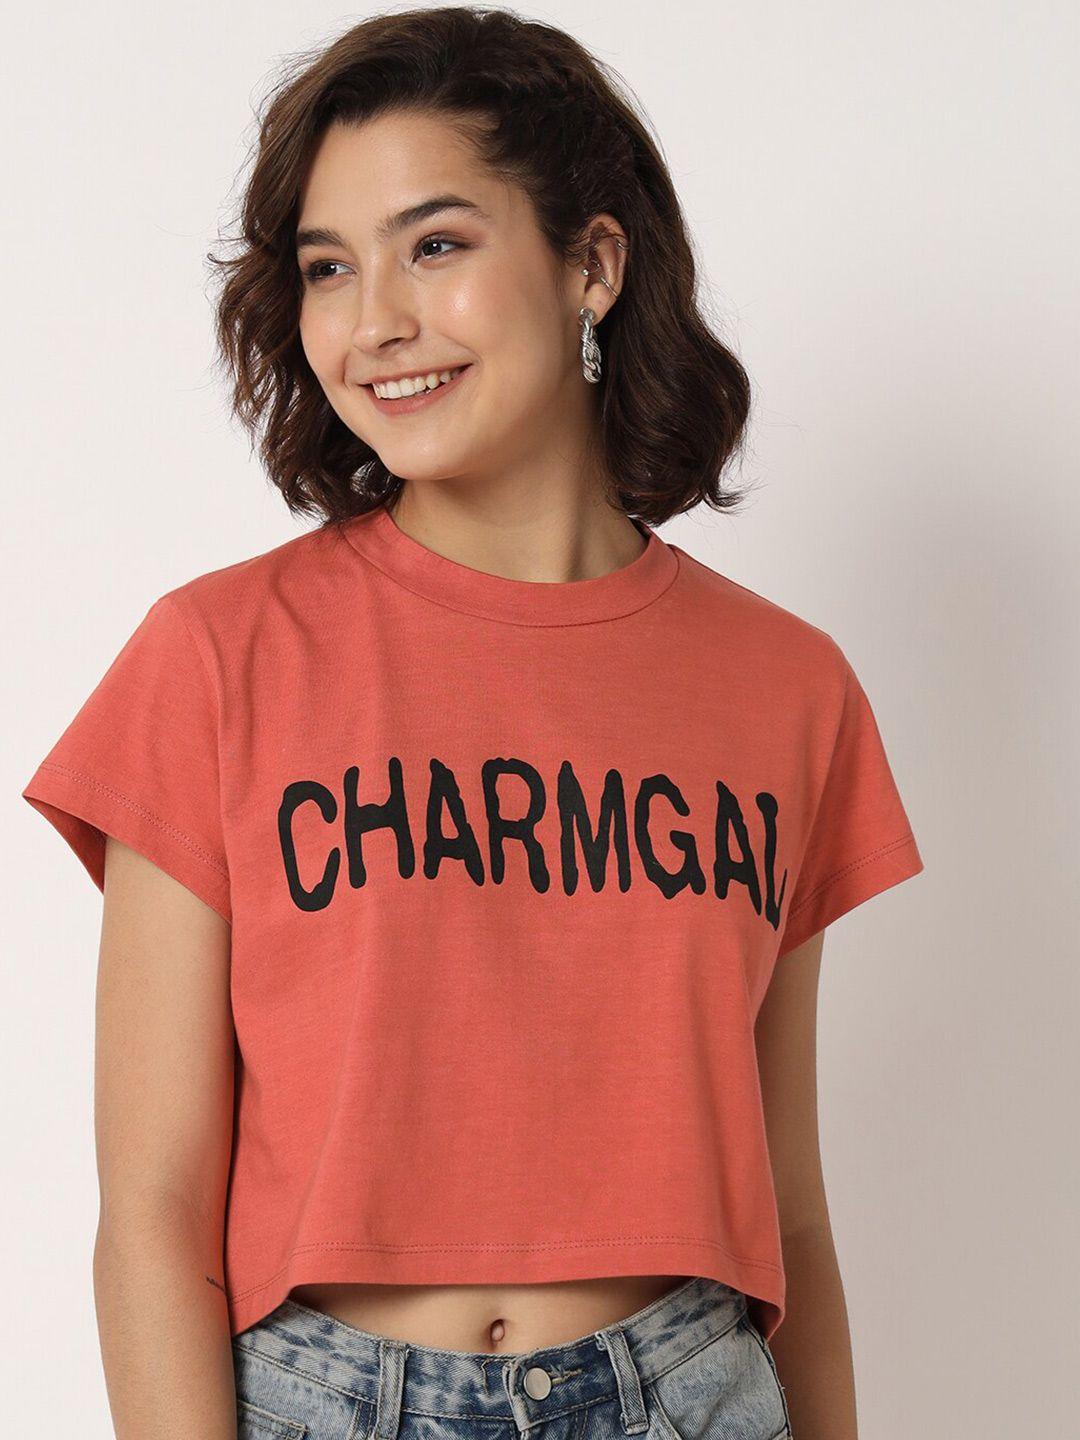 charmgal typography printed boxy fit crop t-shirt